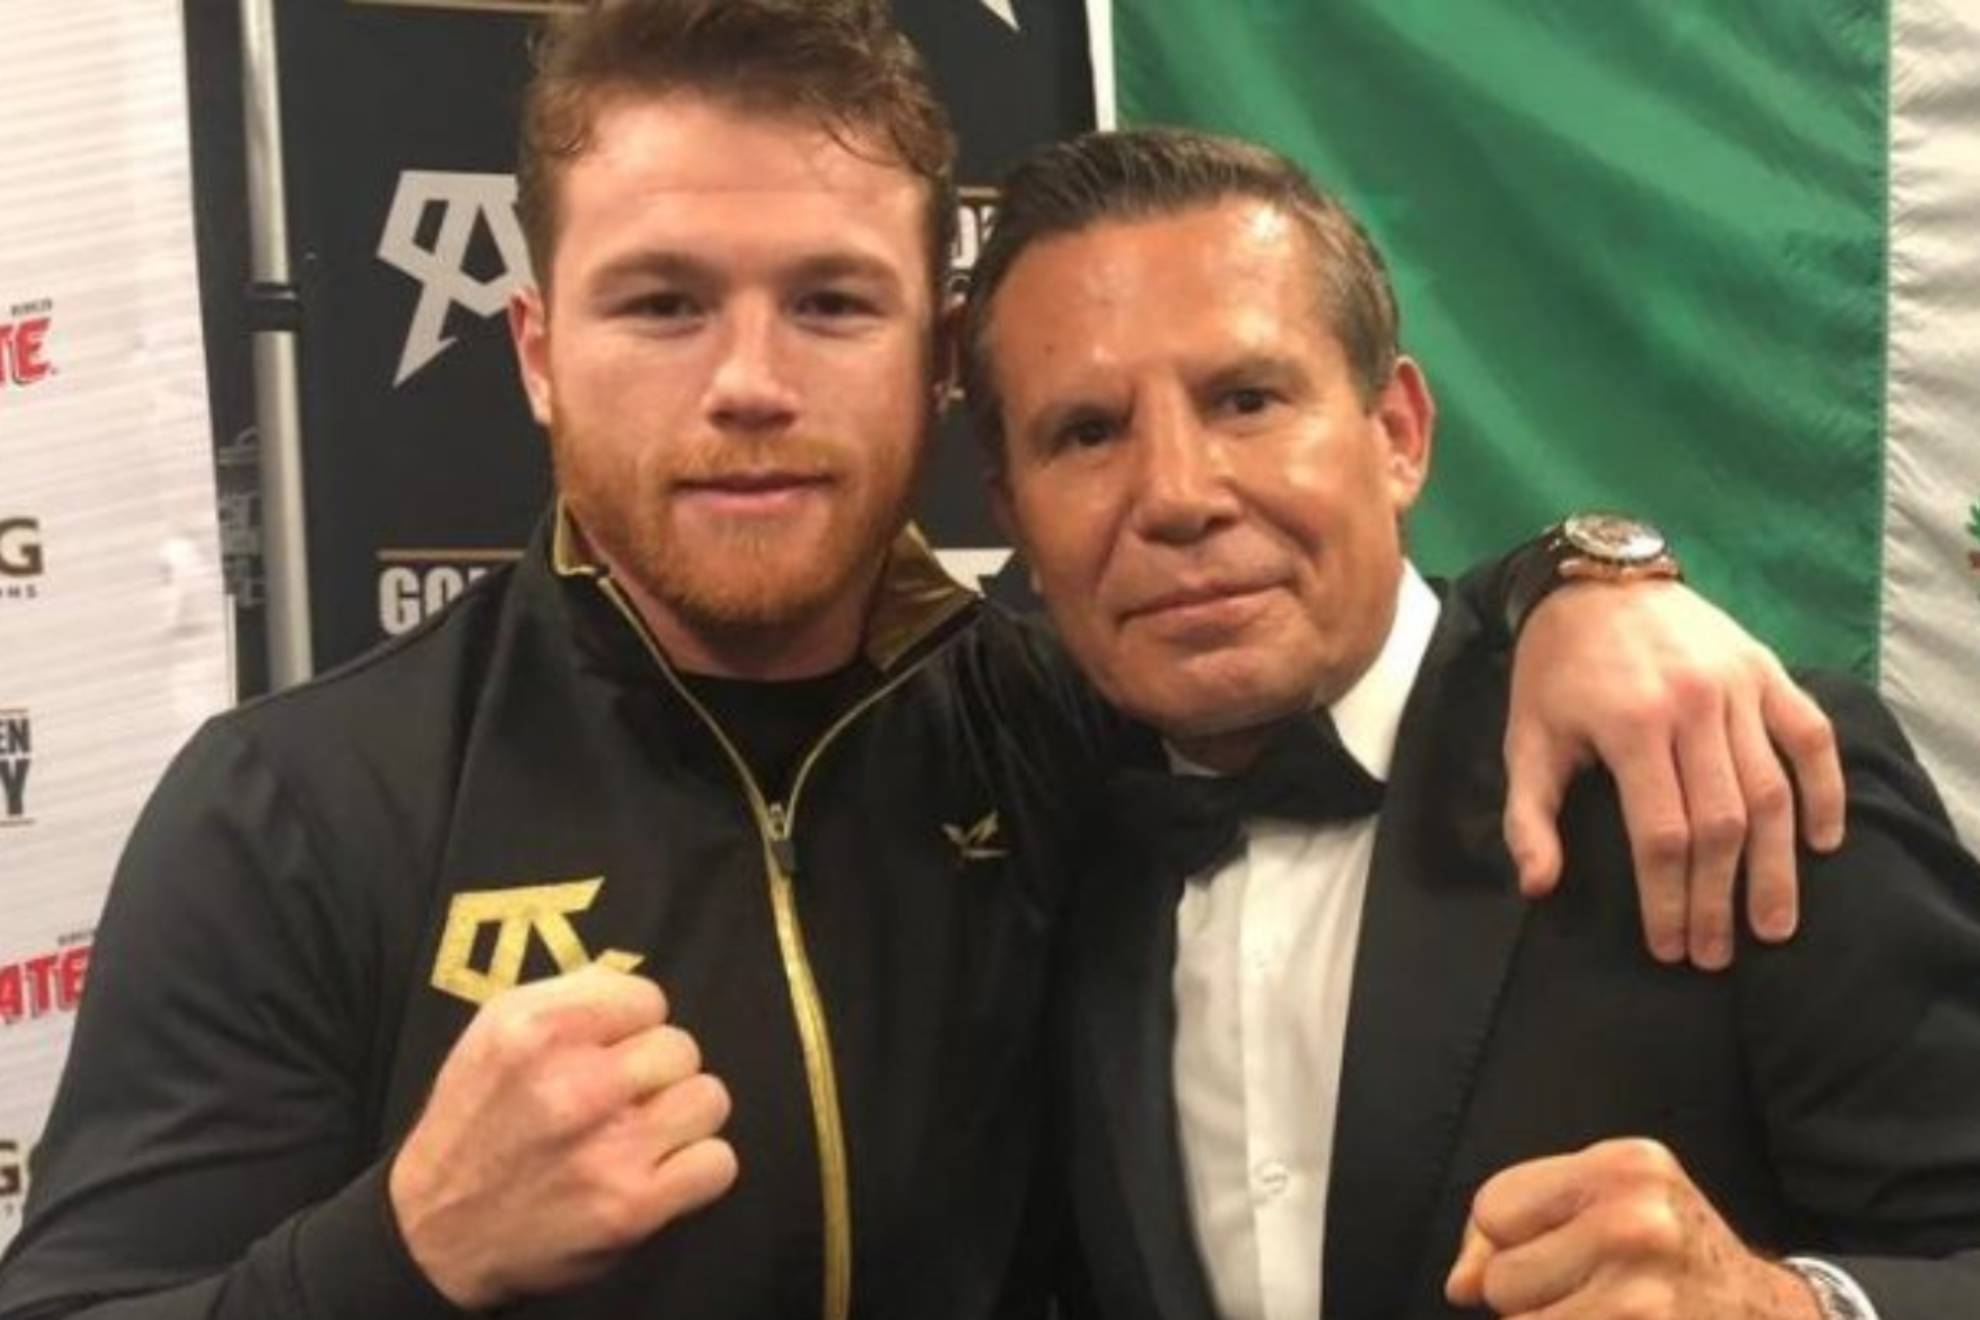 JC Chávez: "I'm worried about Canelo getting in the ring angry"